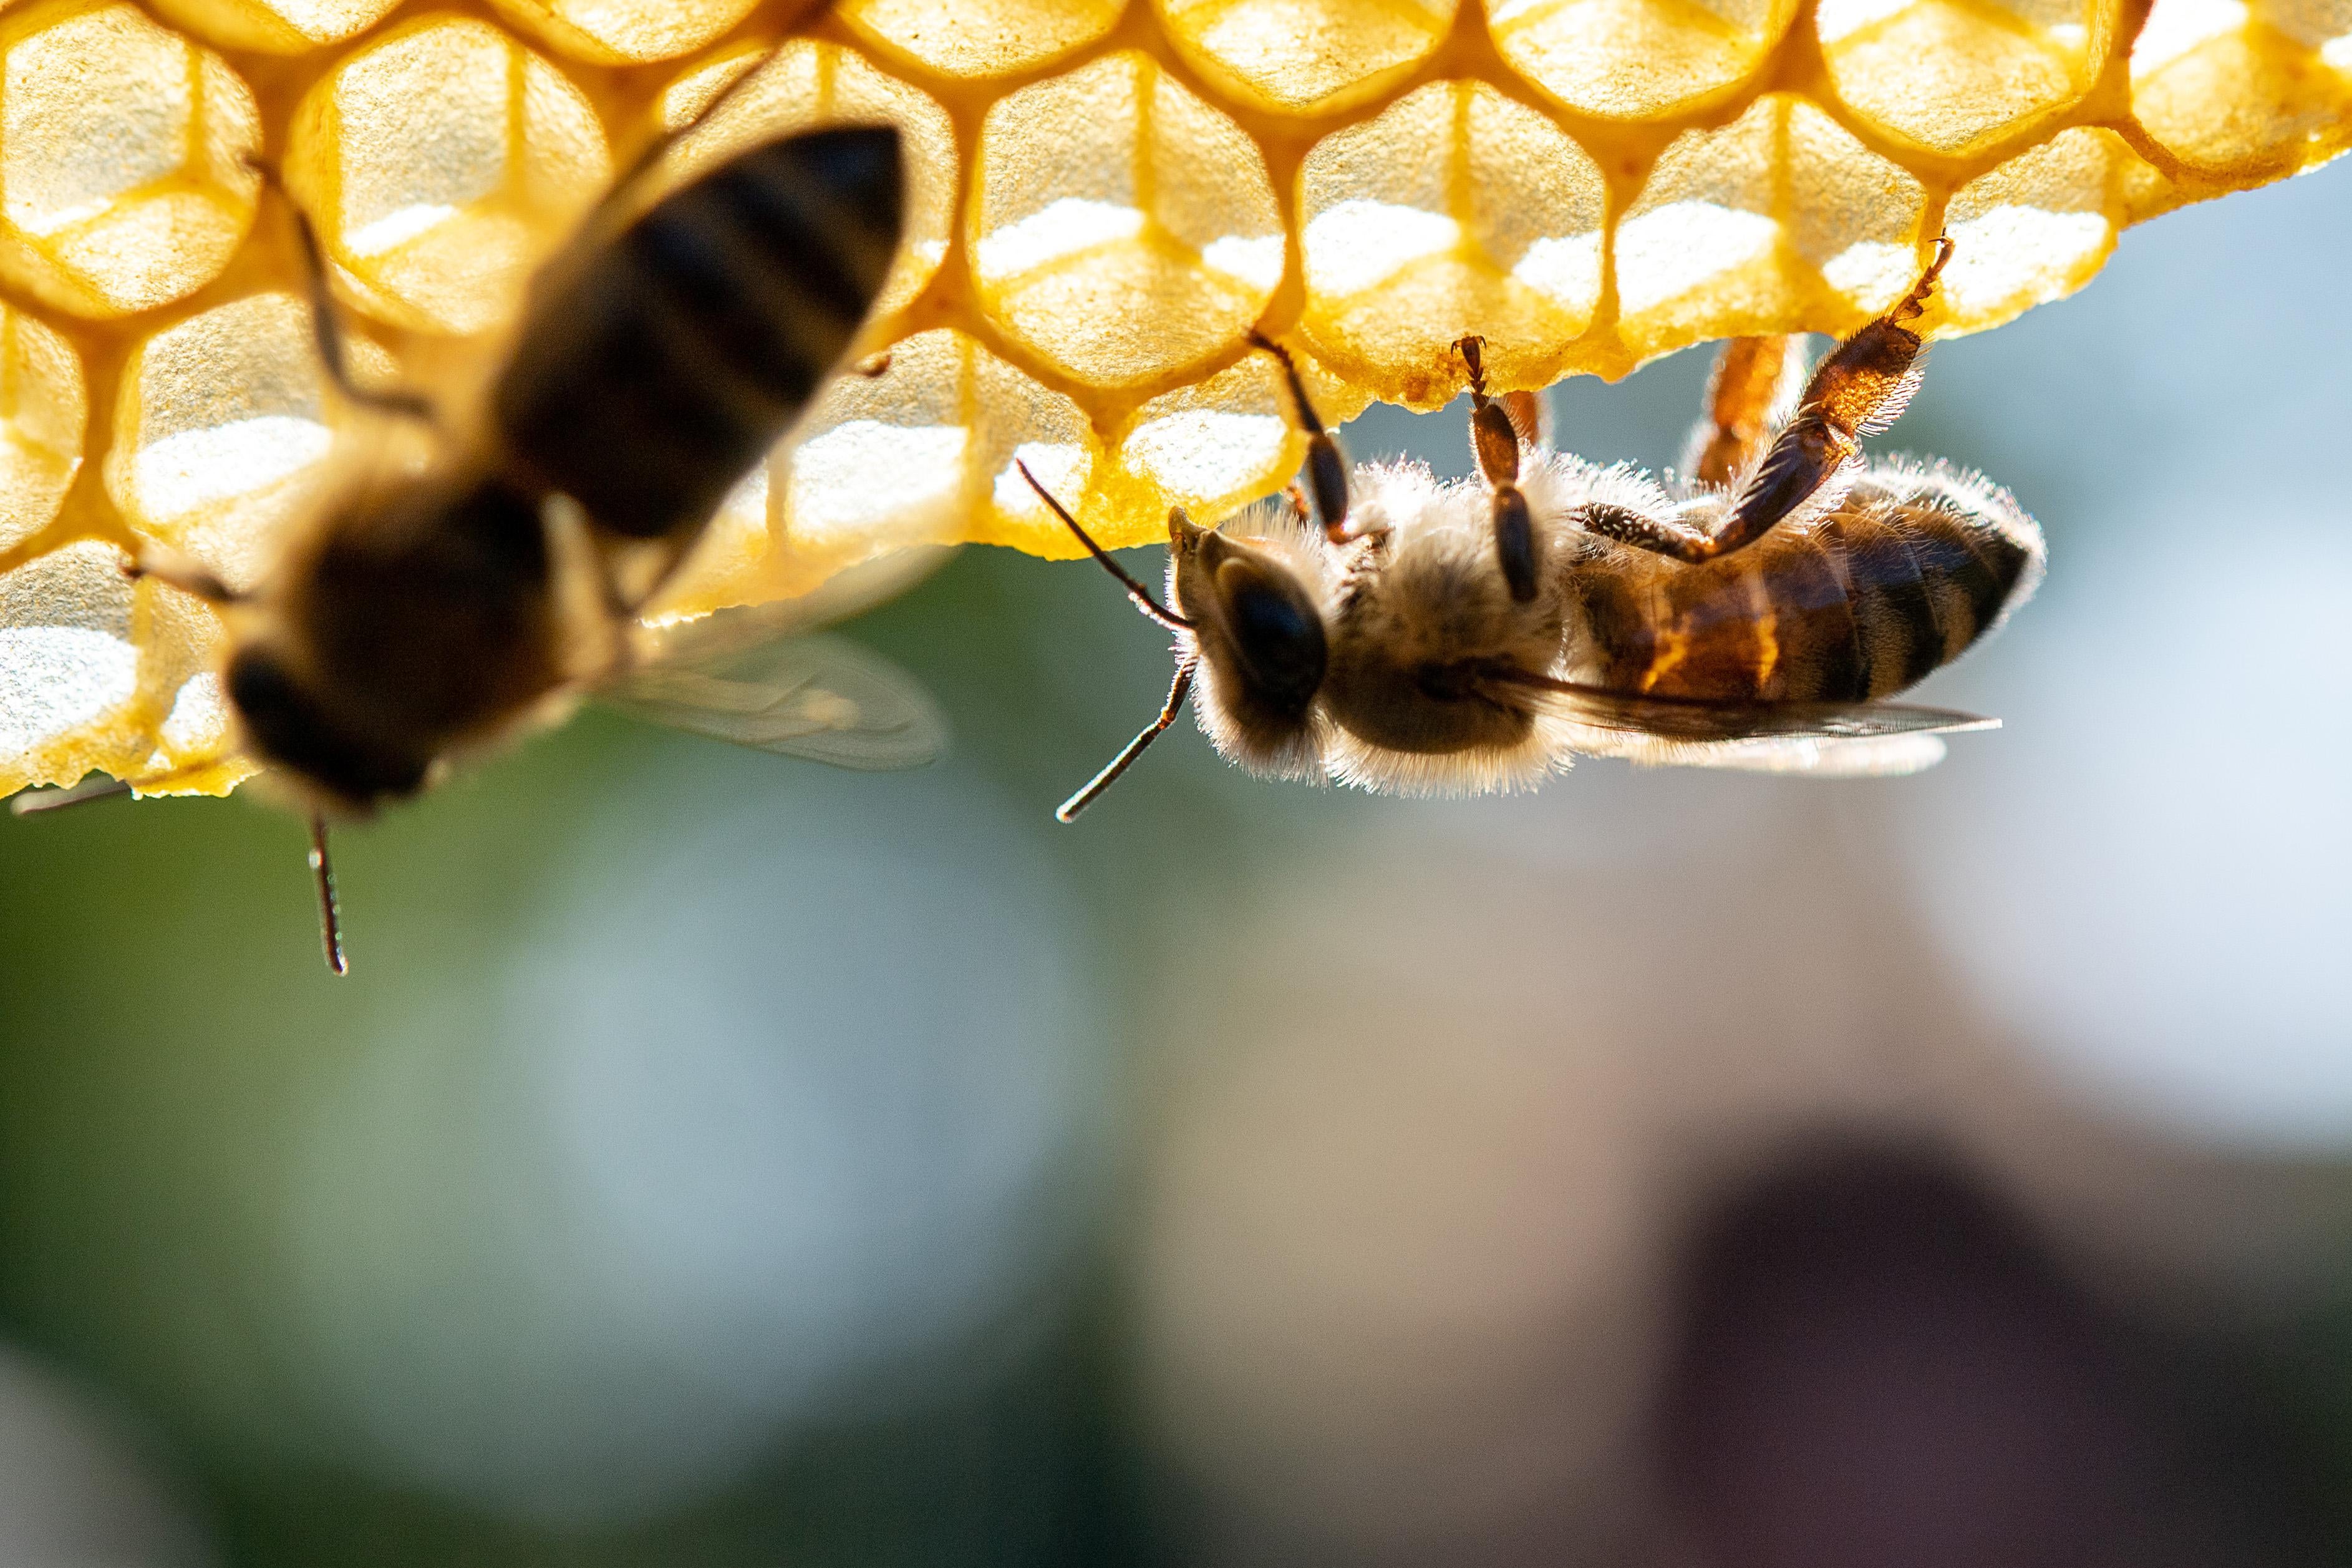 Two bees are seen up close on honeycomb.